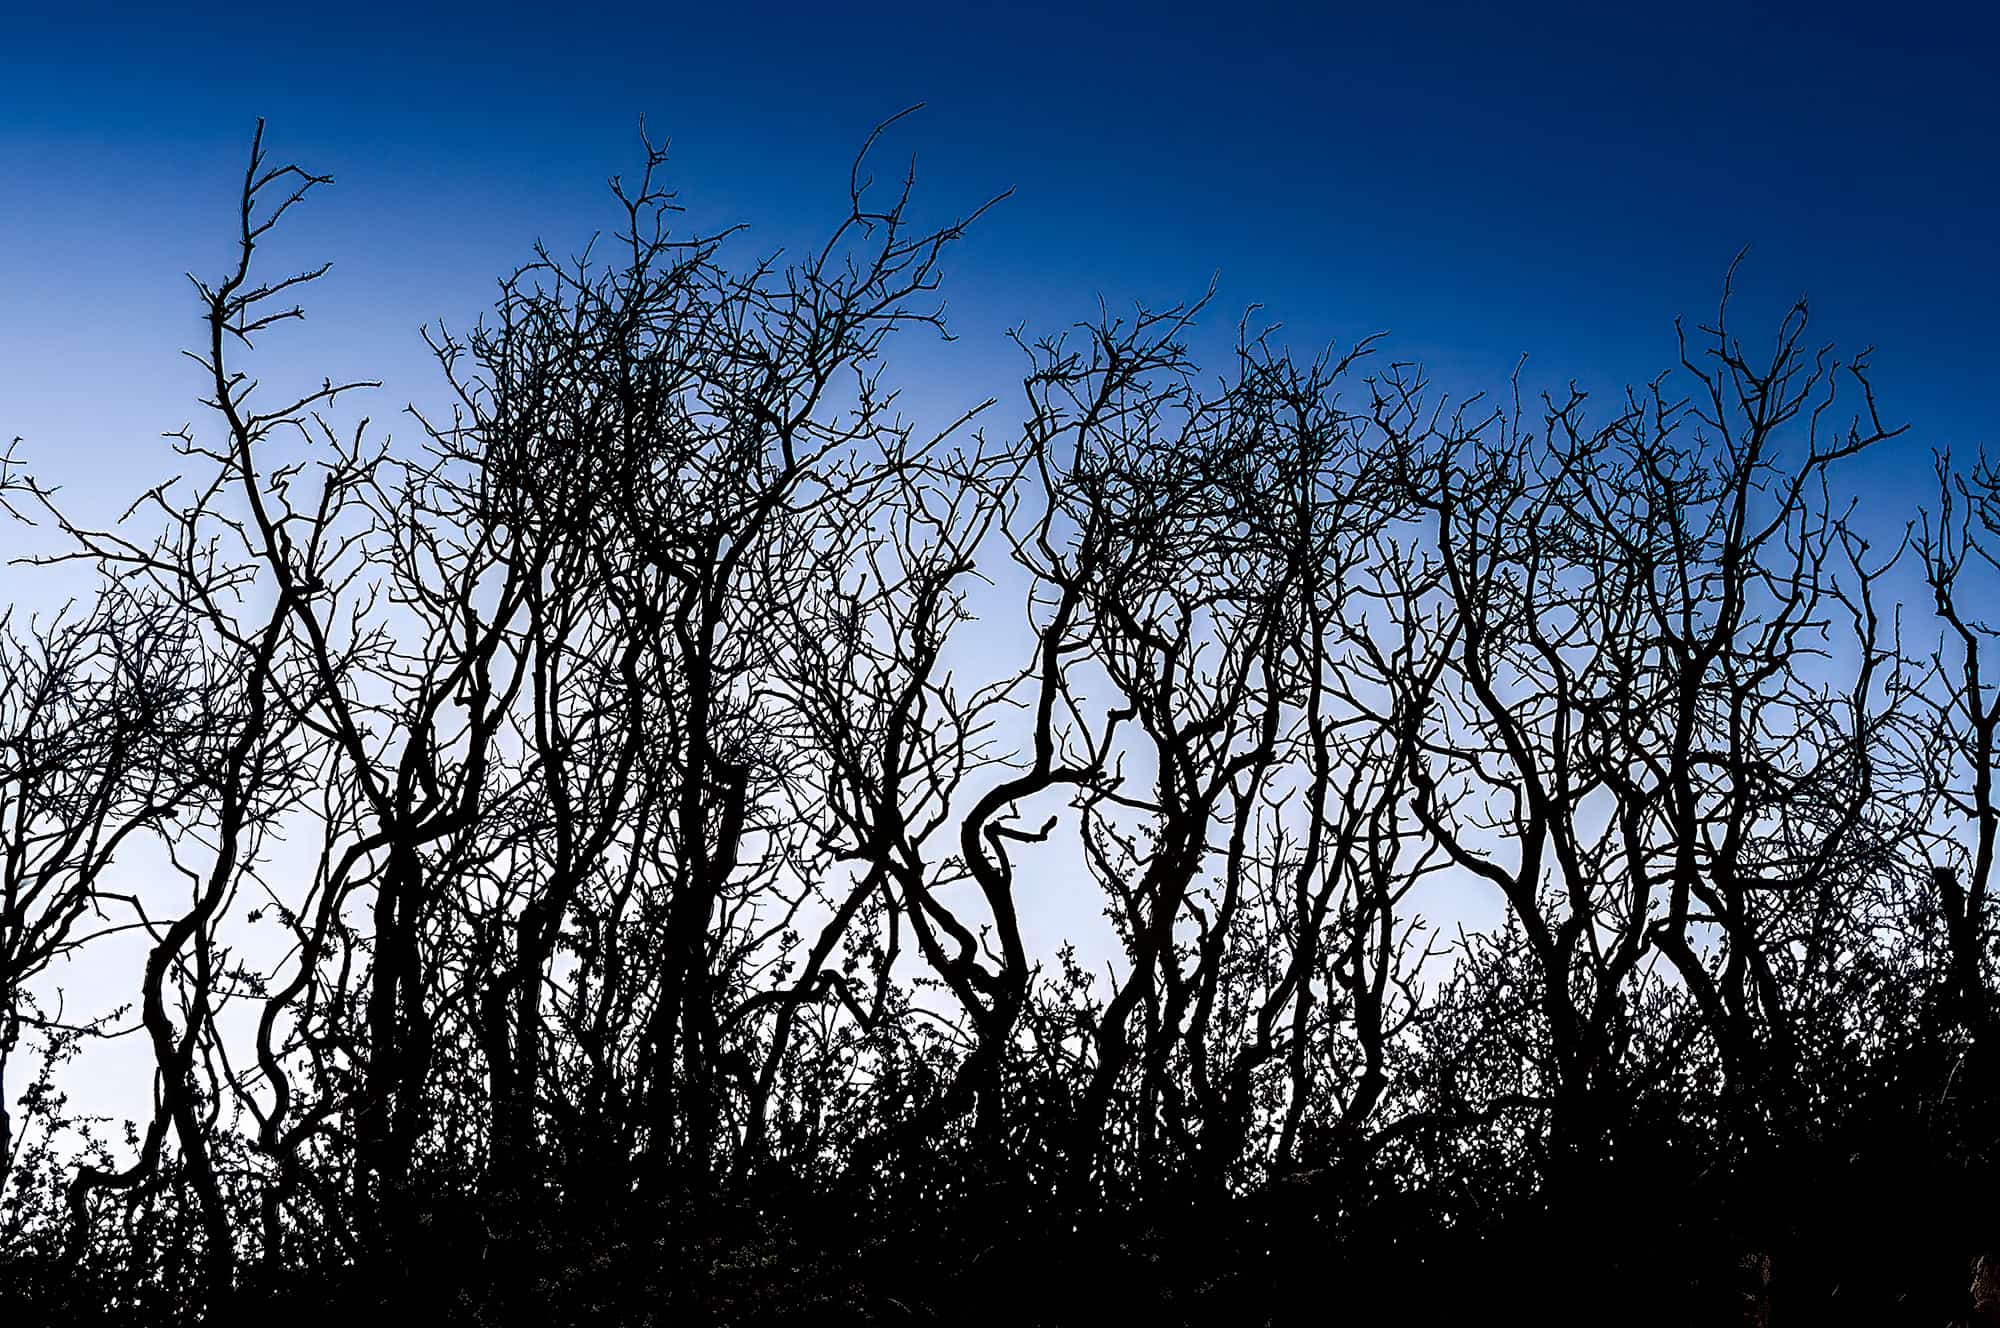 Silhouetted shrubs against a cool blue evening sky